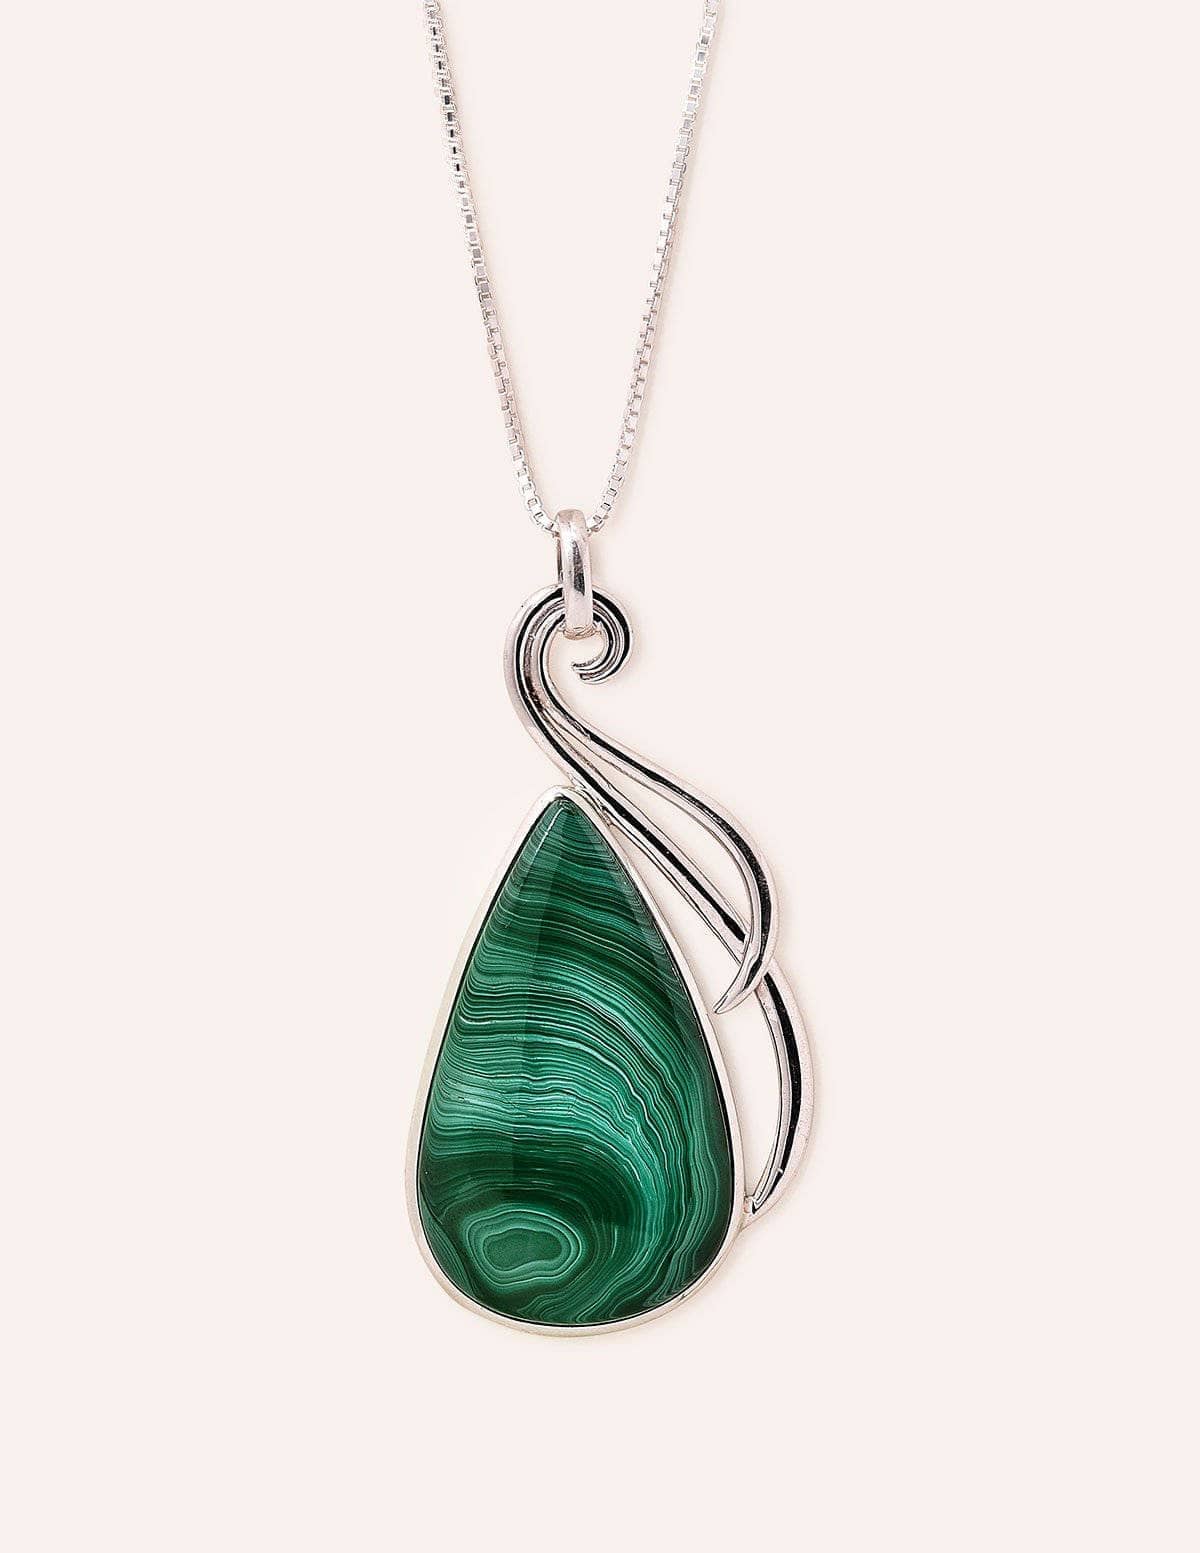 African Malachite Silver Pendant - One of a Kind